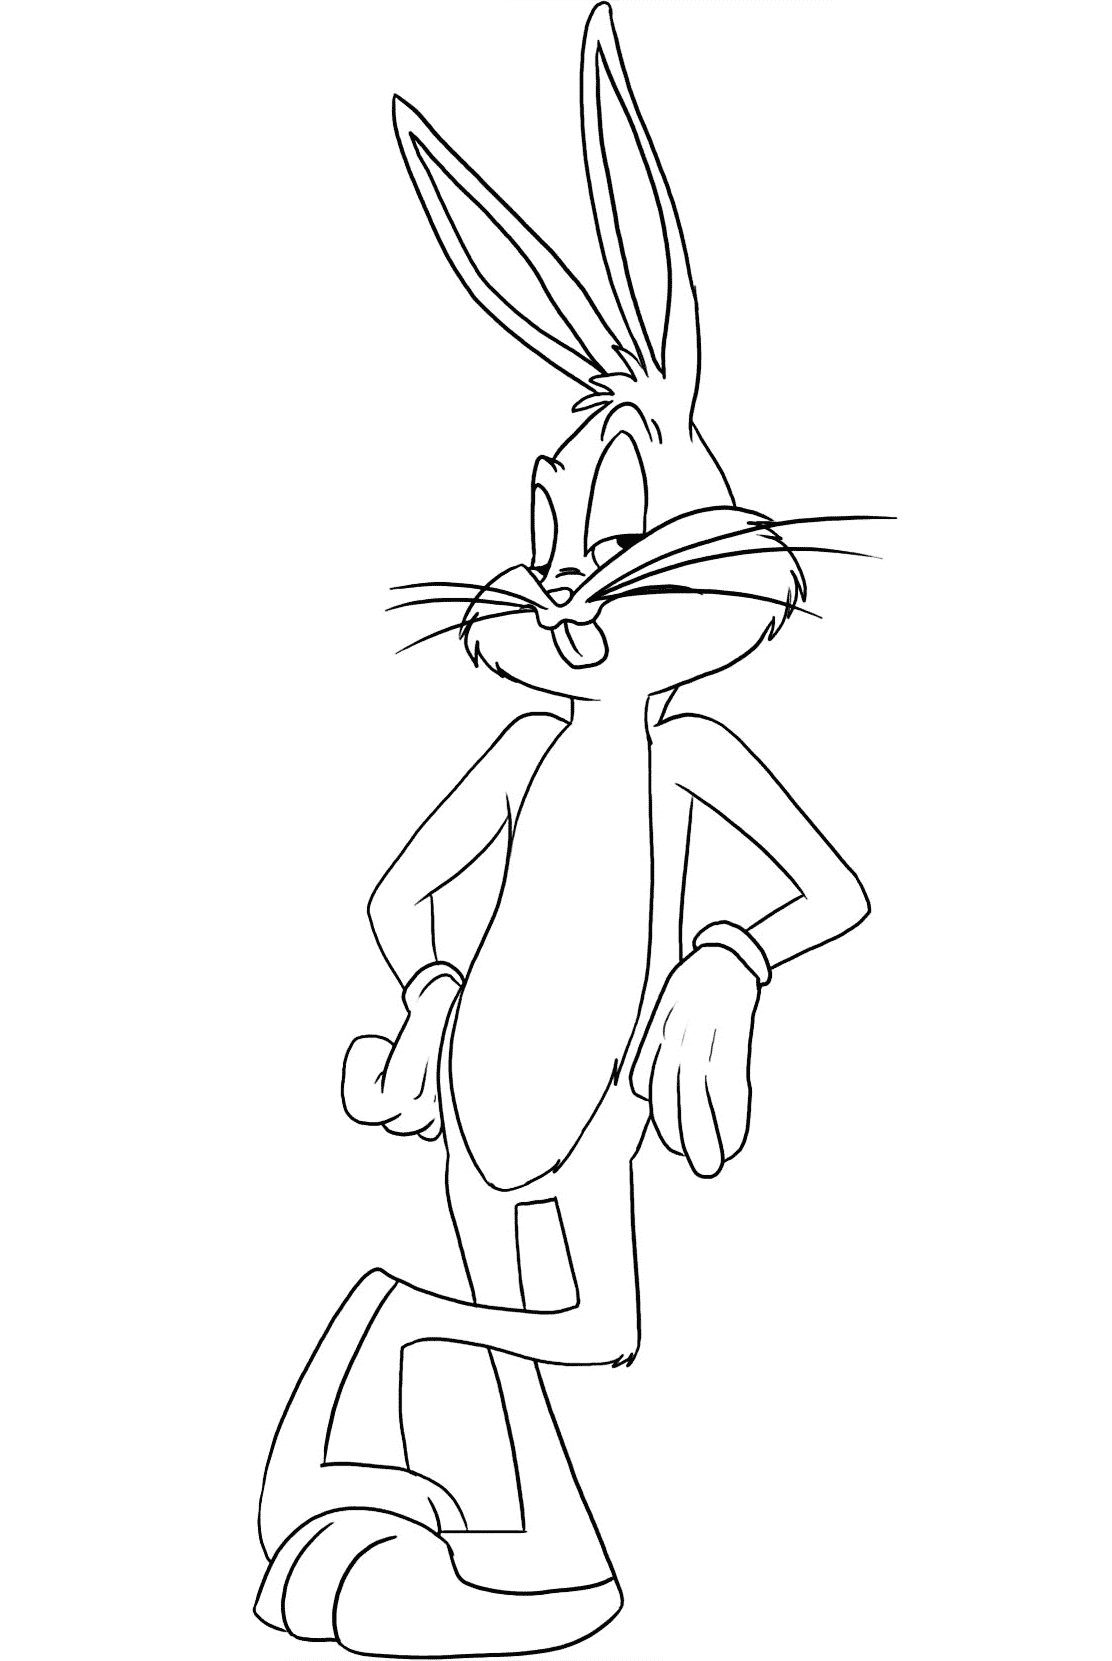 Looney Tunes Bugs Bunny Coloring Page